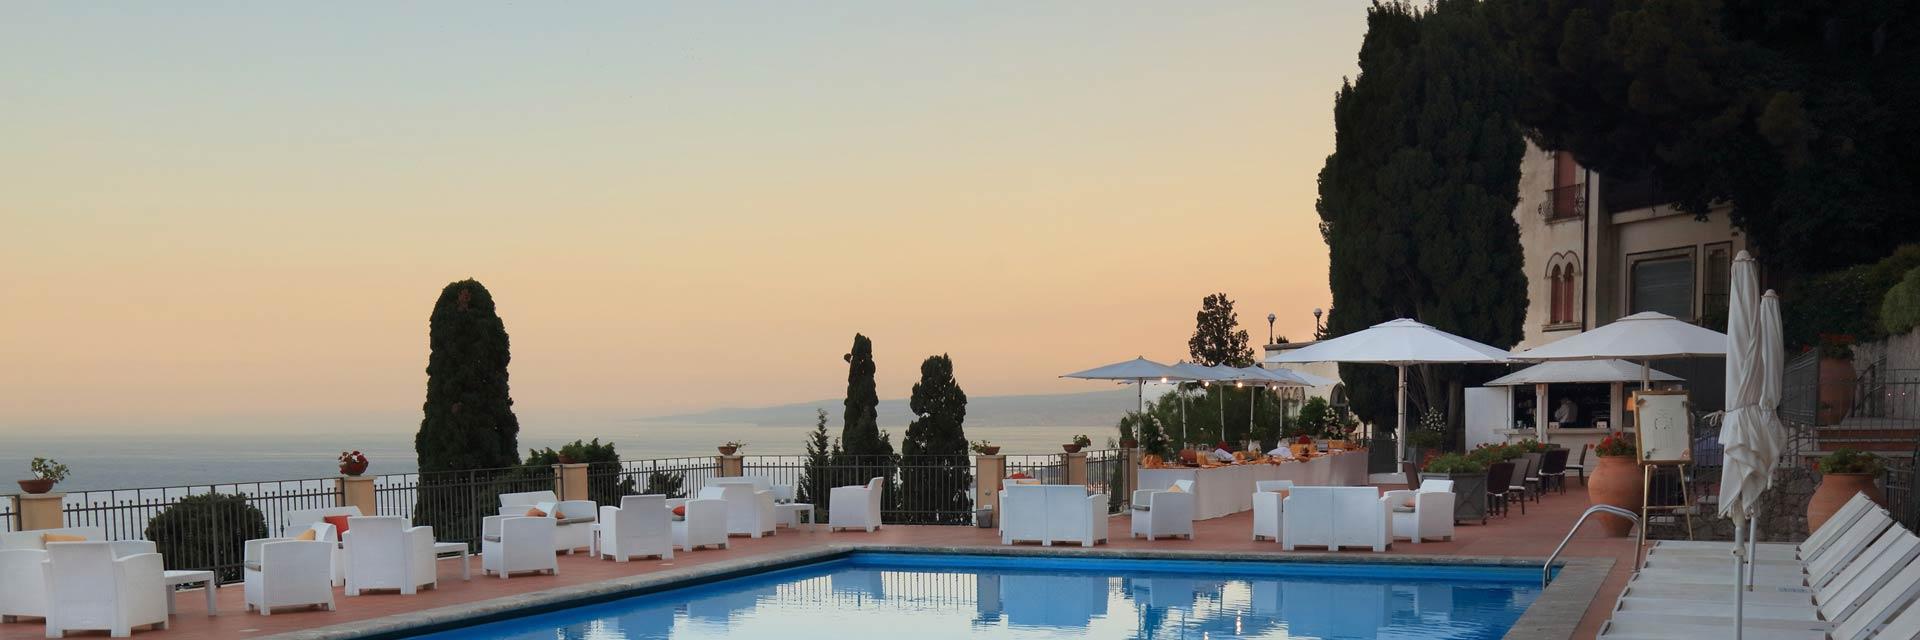 sanpietrotaormina en offer-for-day-use-at-hotel-in-taormina-with-swimming-pool-and-dinner-included 010